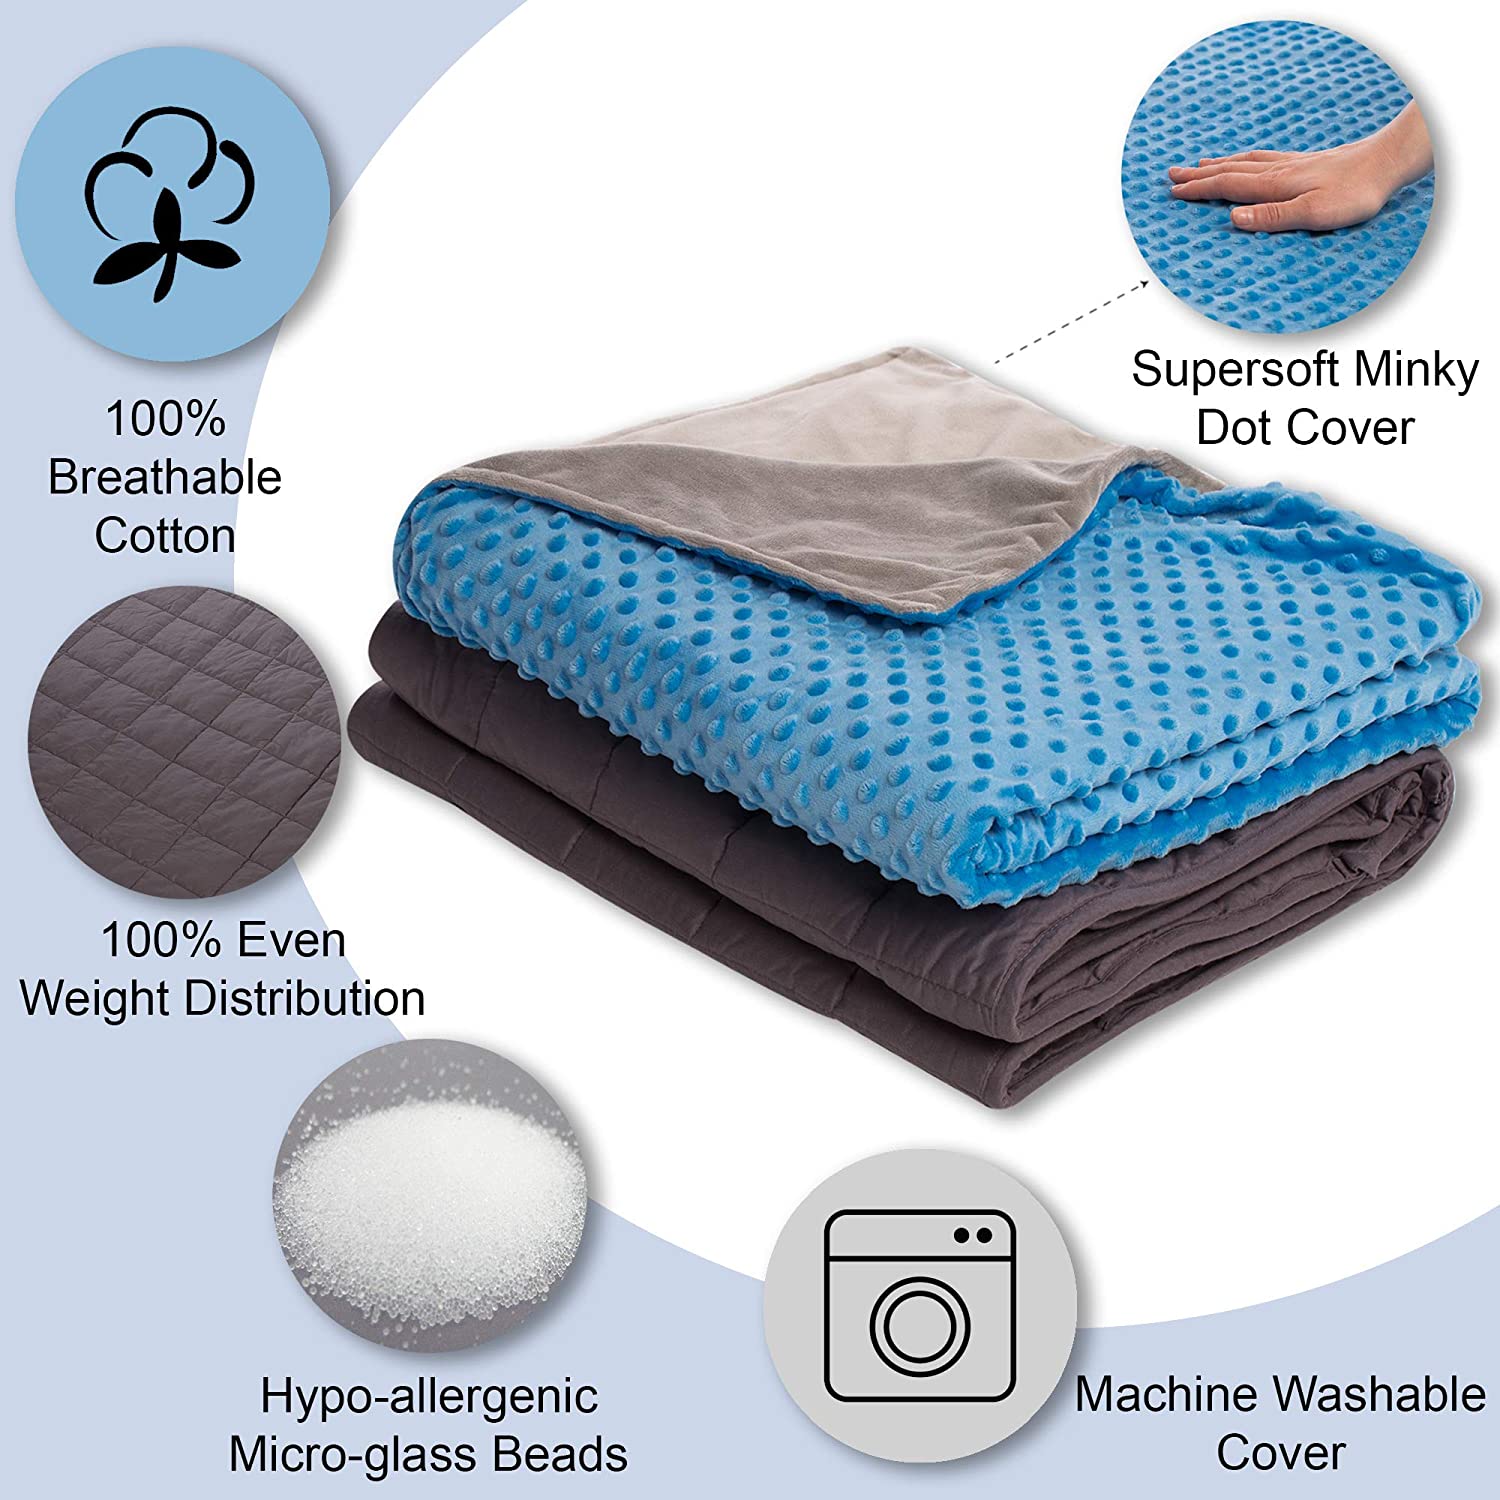 Super Soft 10 lbs Weighted Blanket for Kids & Removable Cover - 41 x 60 inch Weighted Blankets with Glass Beads Single Size - Kids Heavy Blanket for Girls and Boys - Sky Blue - Hazli Collection 